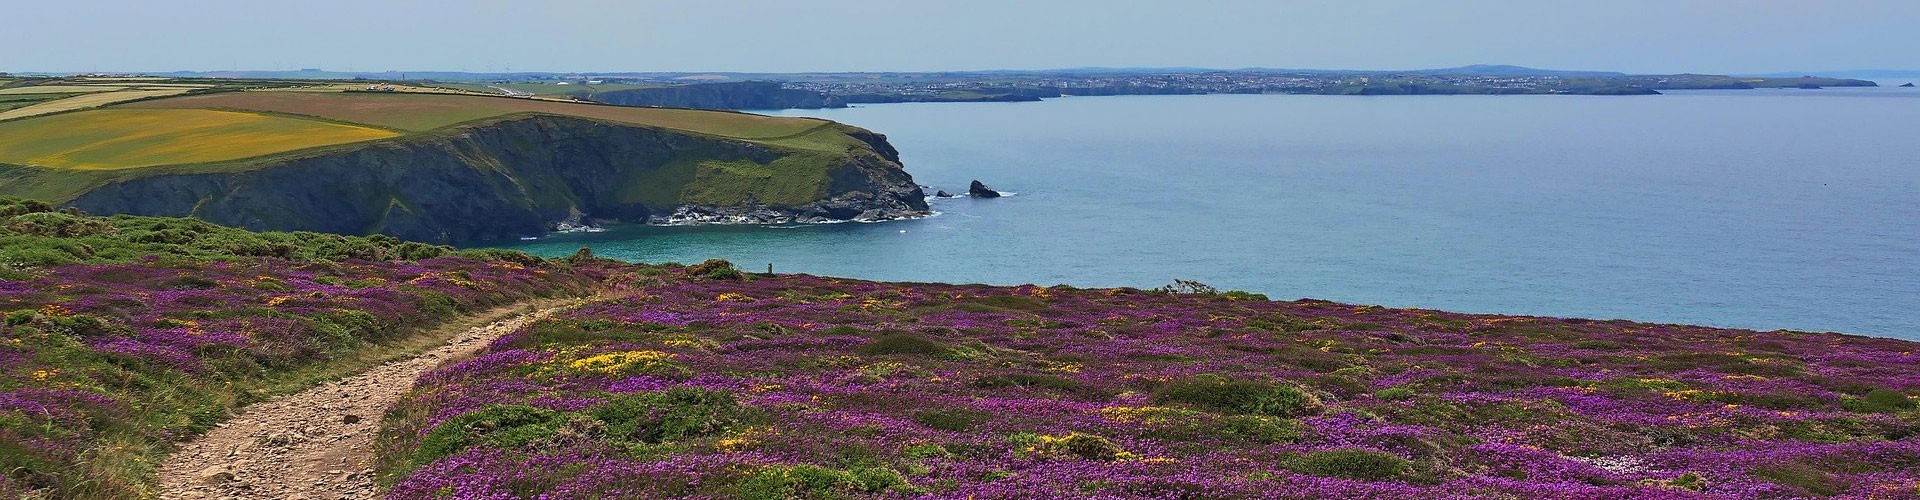 Cornish clifftop with flowers in foreground